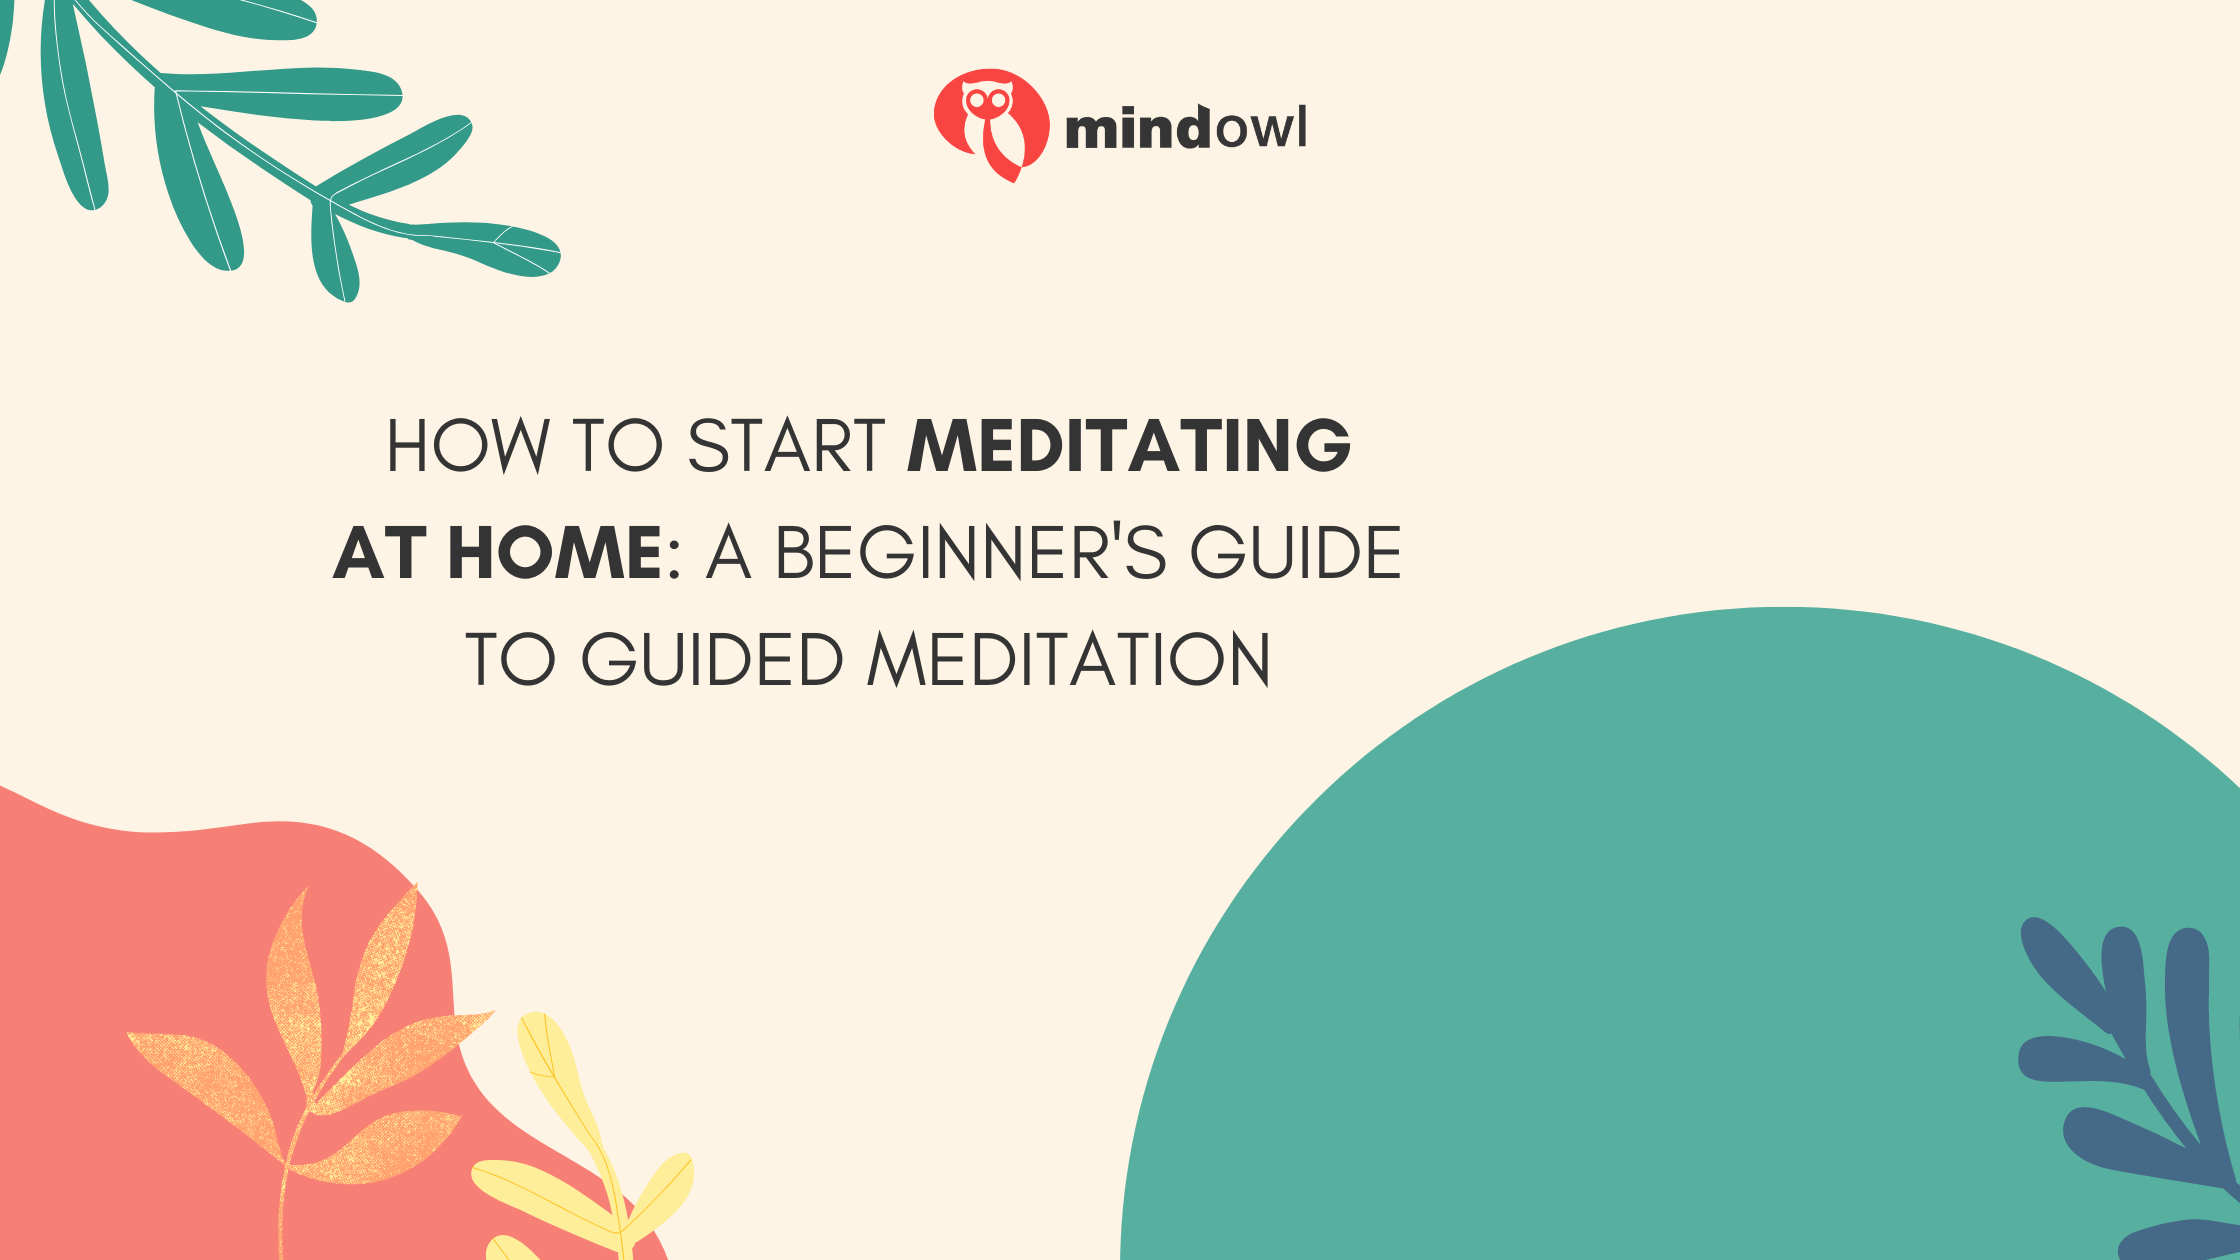 How to Start Meditating at Home: A Beginner’s Guide to Guided Meditation